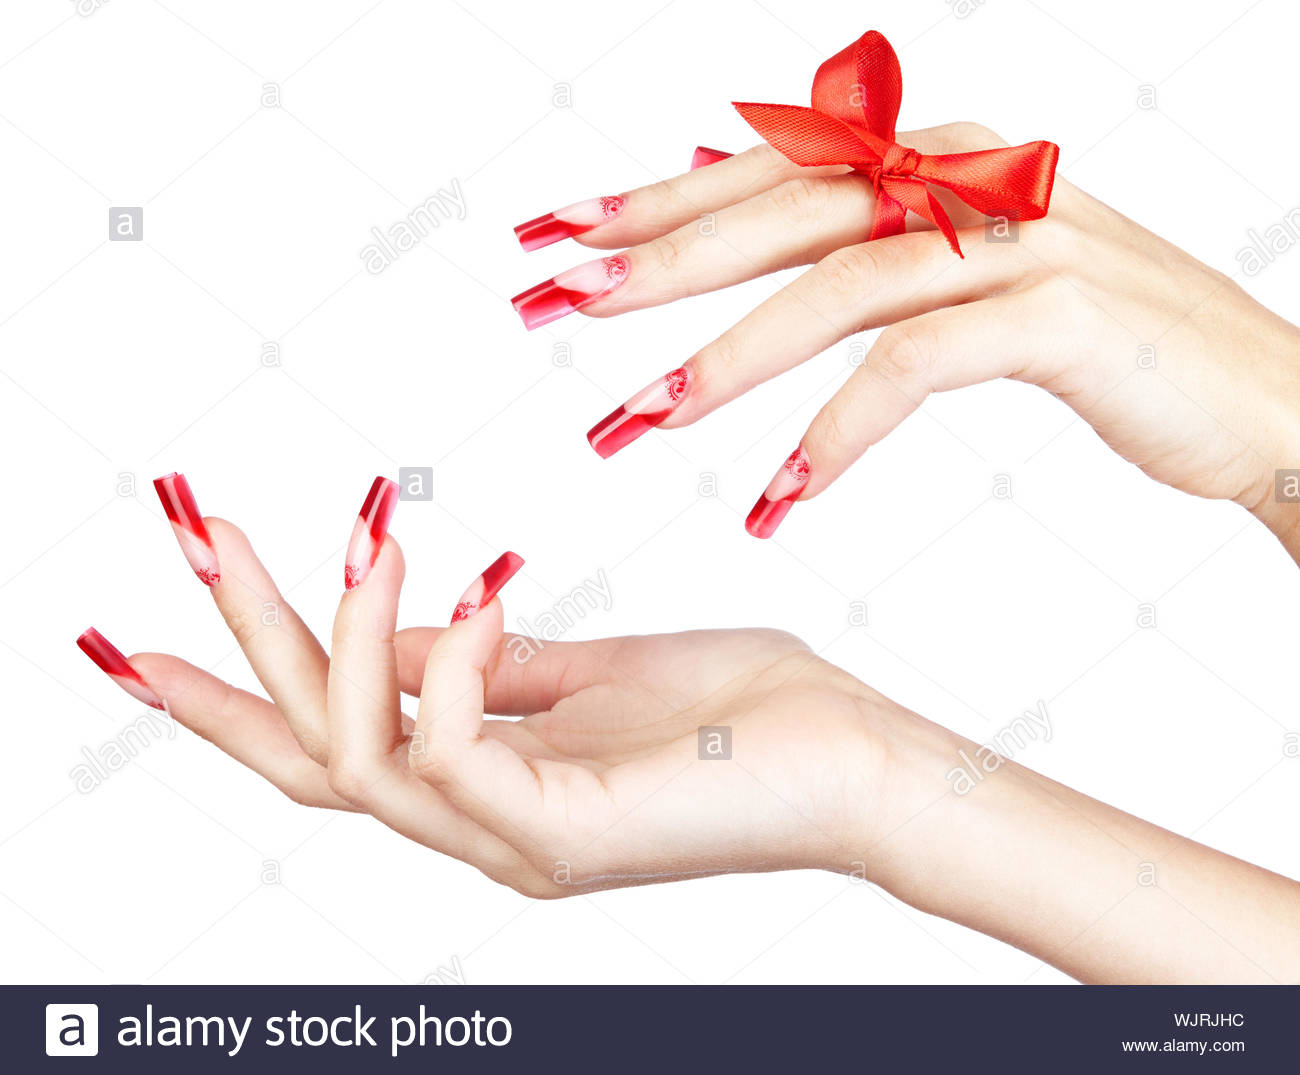 Hands With Red French Acrylic Nails Manicure And Painting With Bow On Finger Isolated White Background Stock Photo Alamy